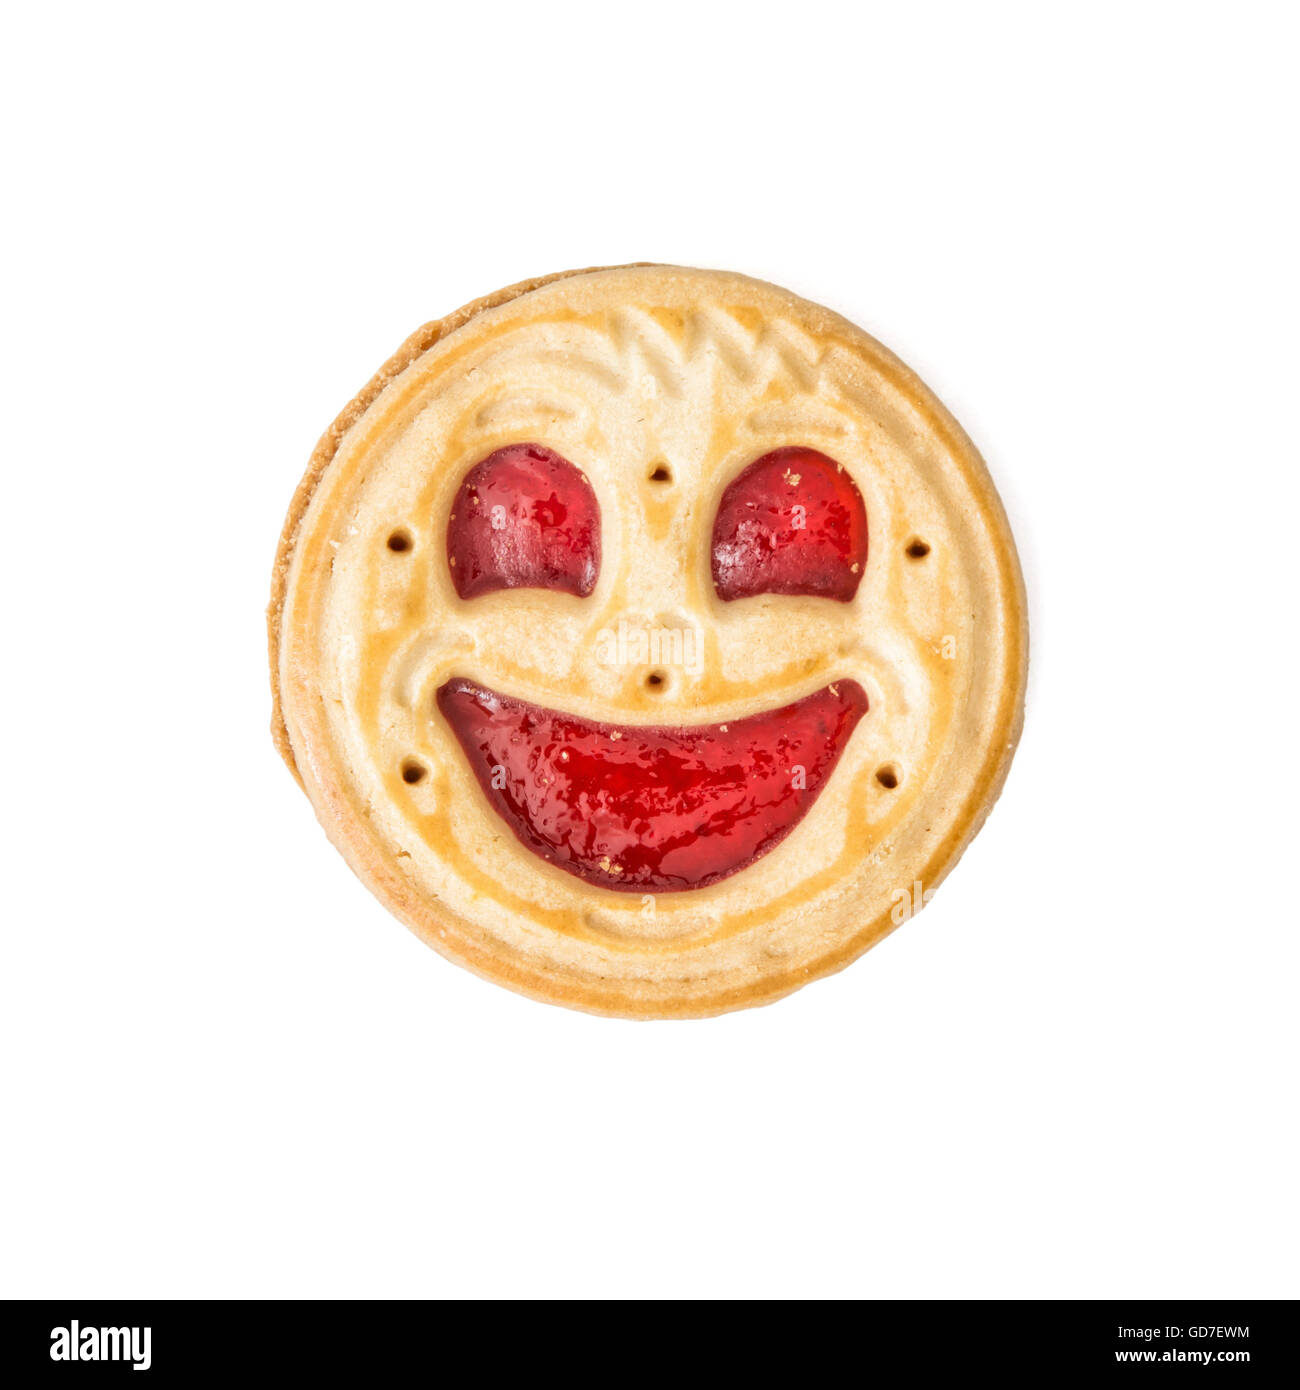 Round jam biscuit smiling face isolated on the white background. Humorous sweet food. Tasty cookie. Good mood. Stock Photo